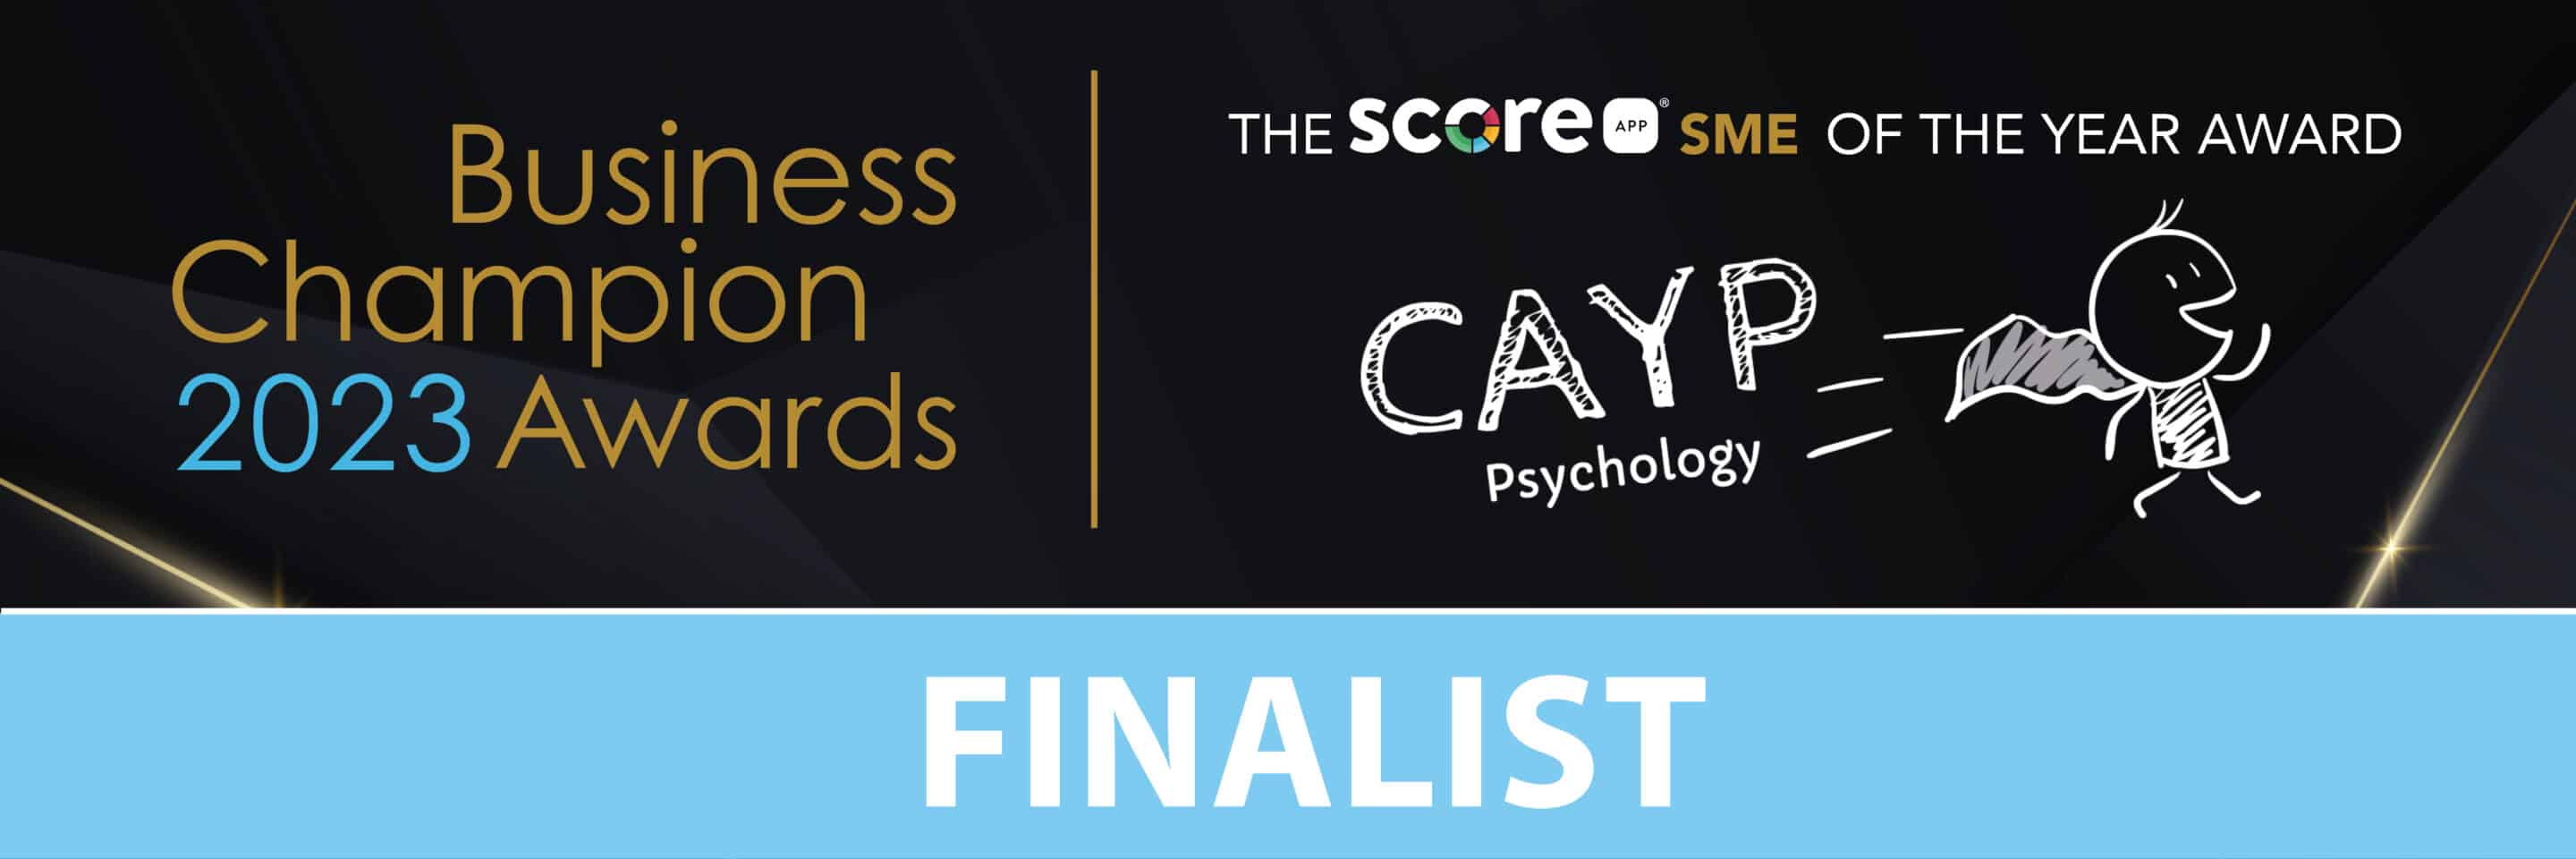 CAYP Psychology Business of the Year Award Business Championship Awards 2023